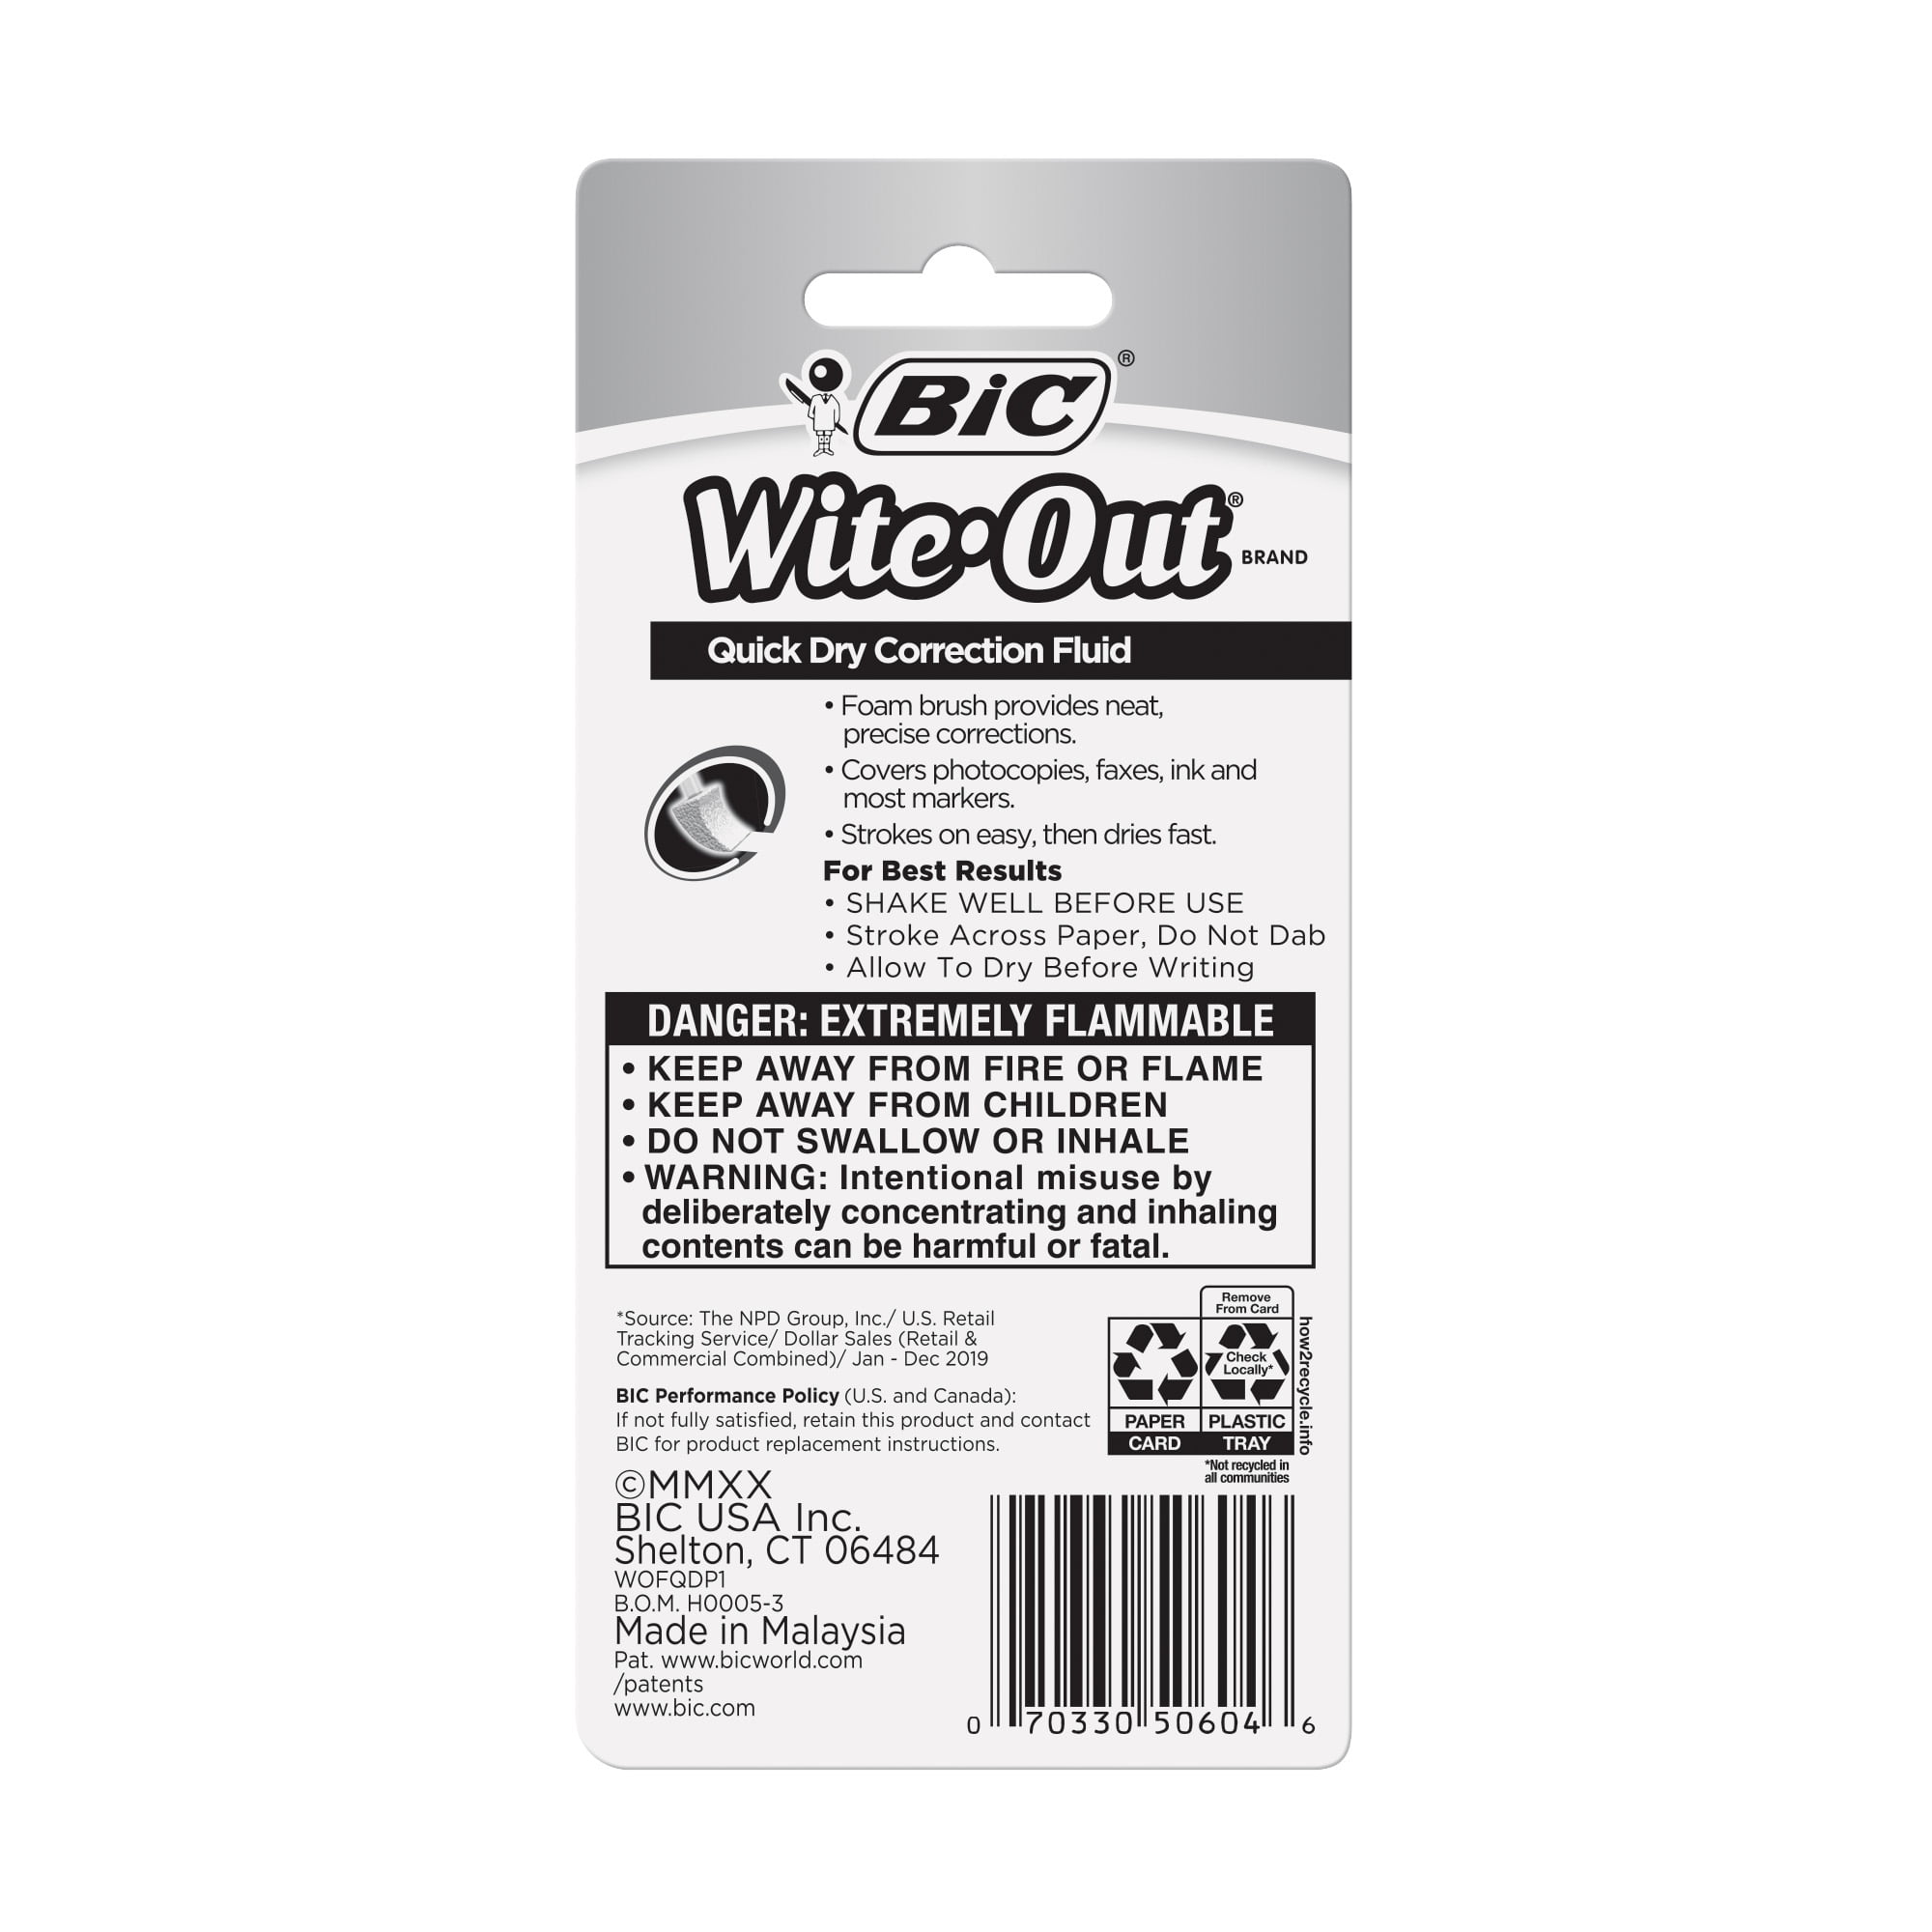 BIC Wite-Out Quick Dry Correction Fluid, .7 fl oz, 0.7 liq ounce